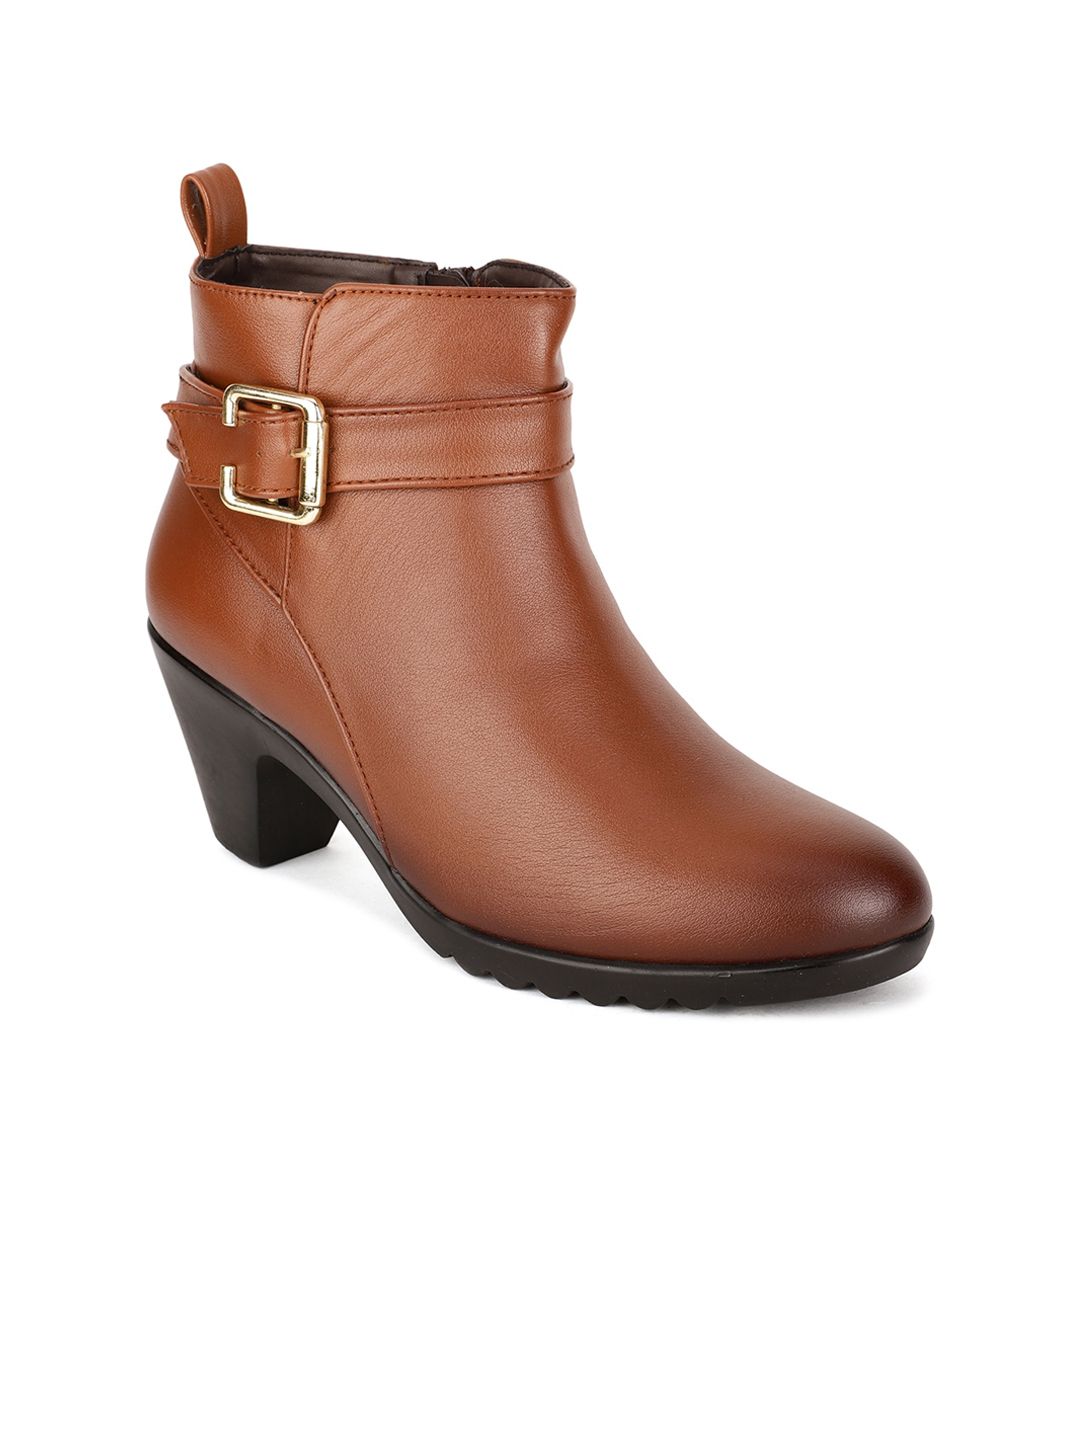 Bruno Manetti Tan Leather Block Heeled Boots with Buckles Price in India